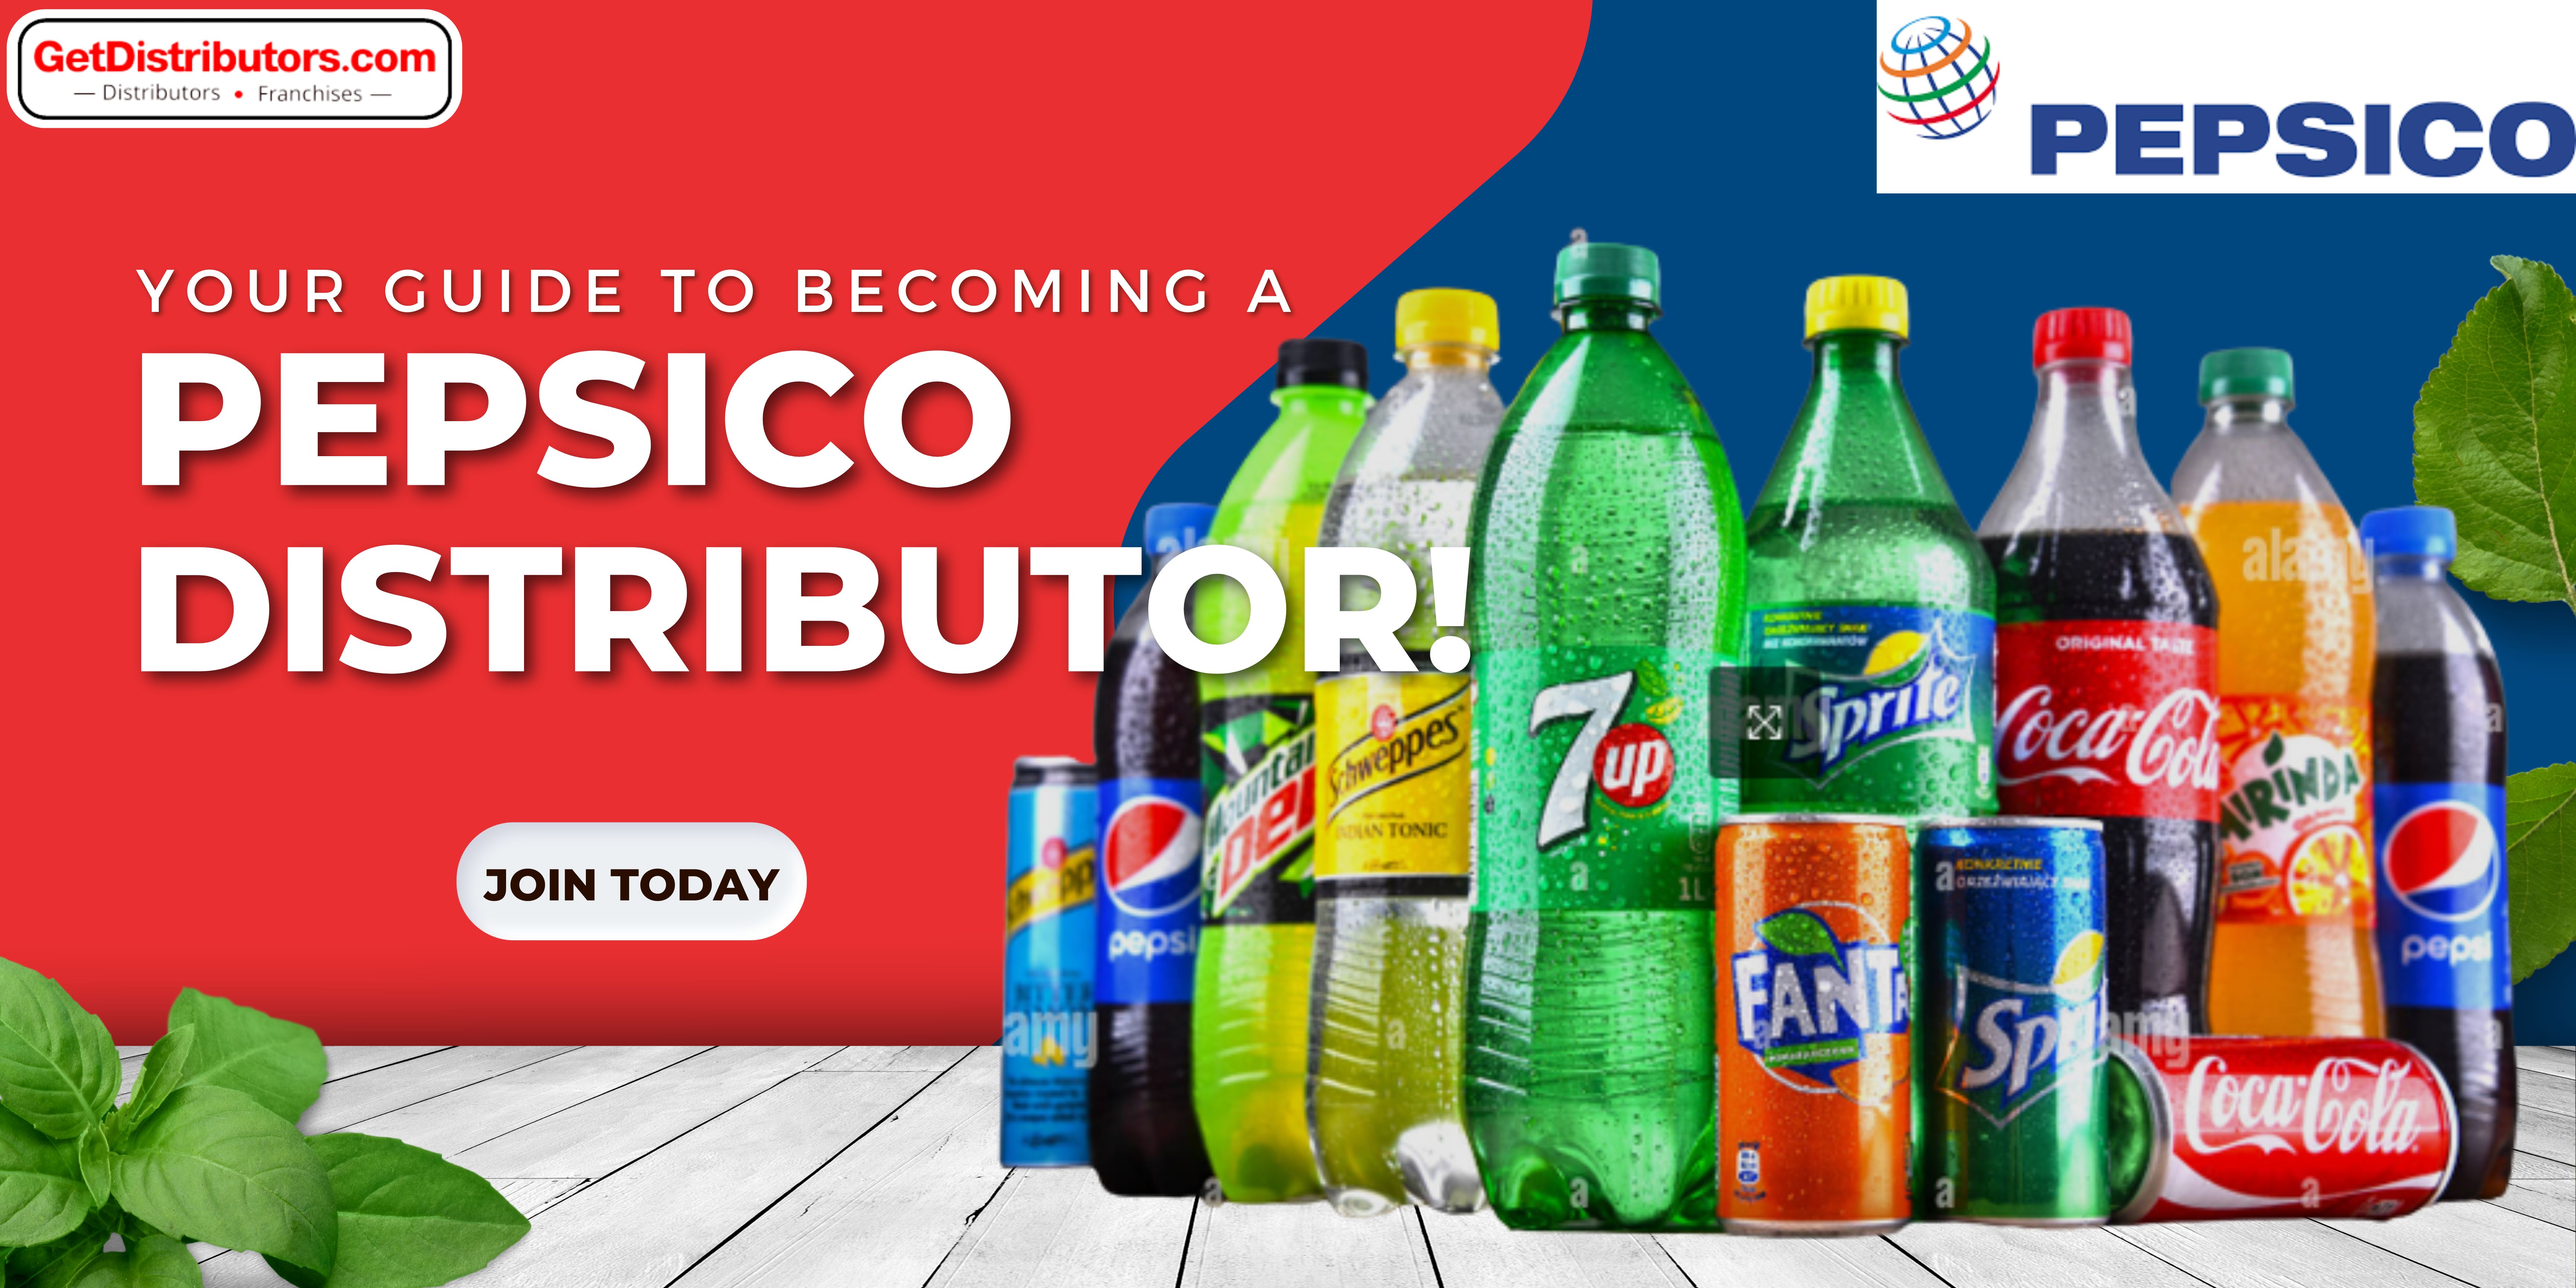 Your Guide to Becoming a PepsiCo Distributor!